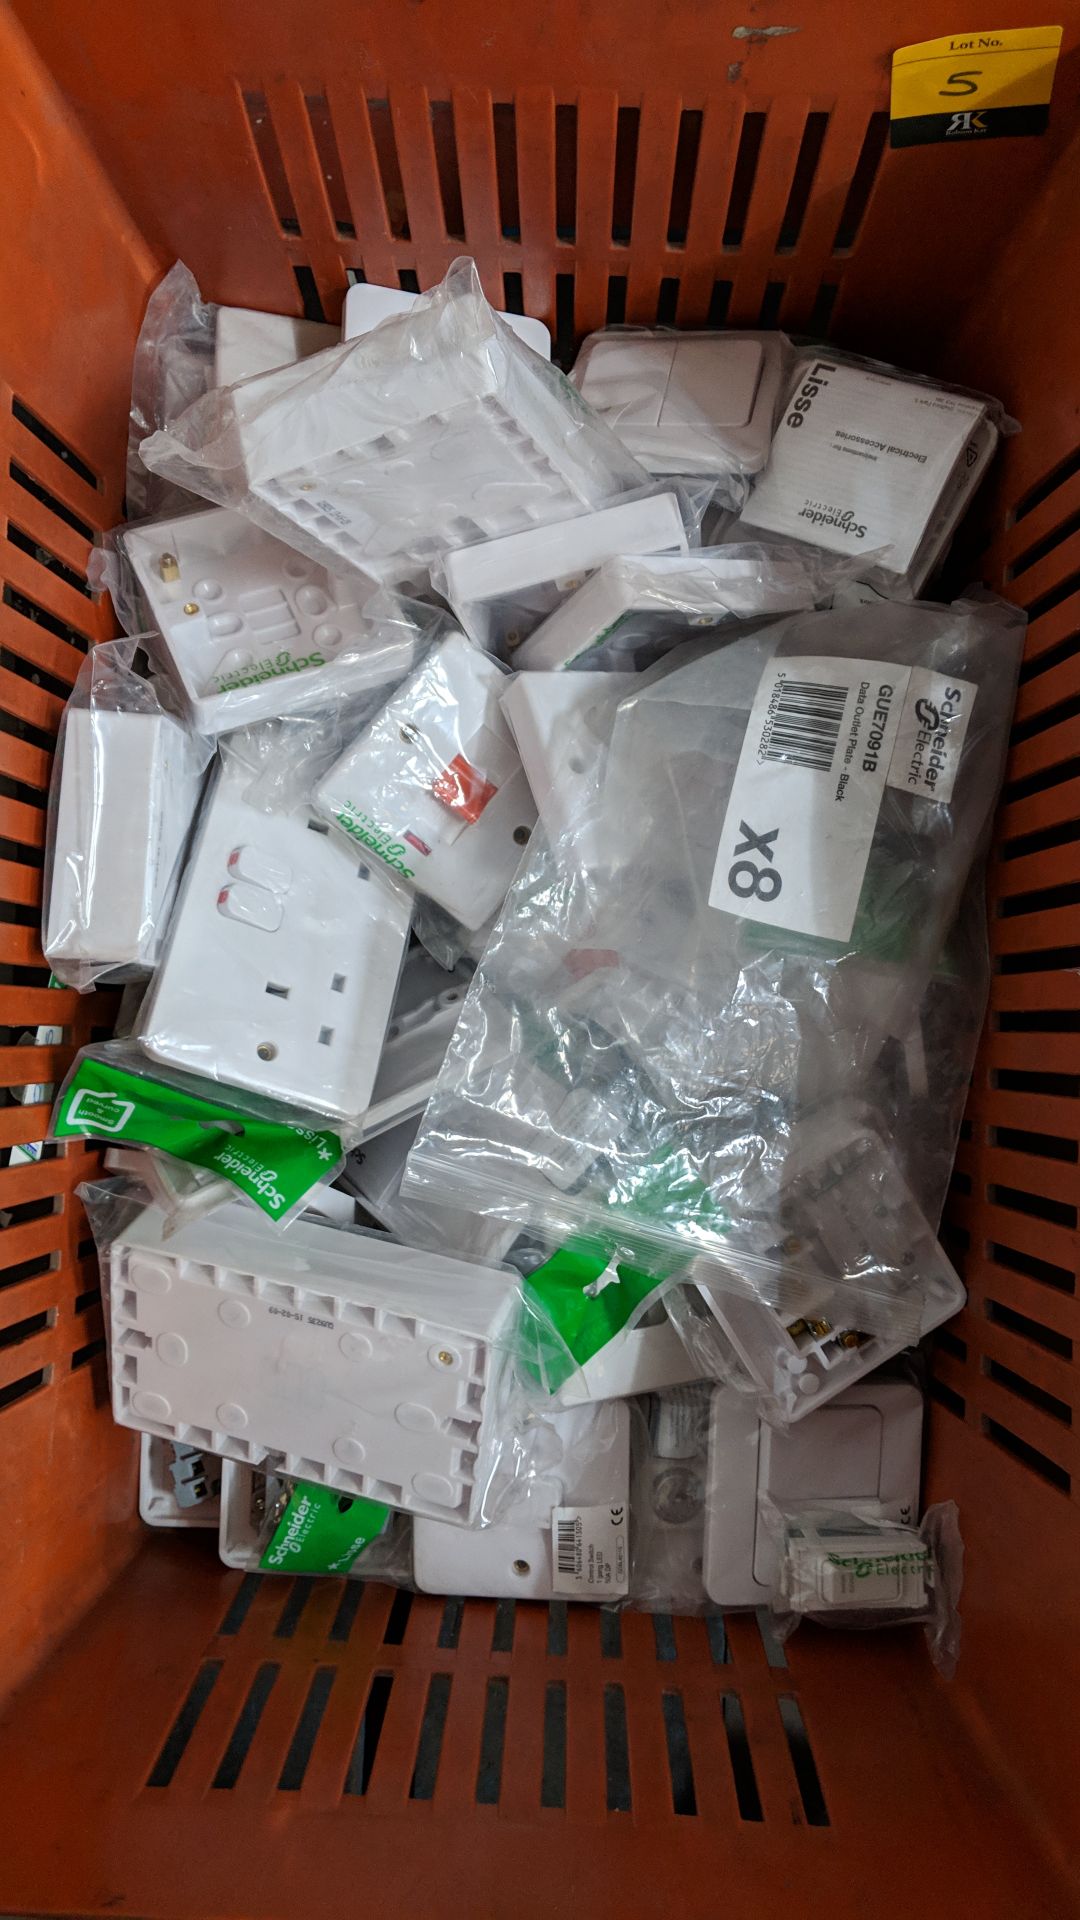 The contents of a crate of assorted Schneider white moulded plastic plug sockets, fused switches, - Bild 4 aus 4